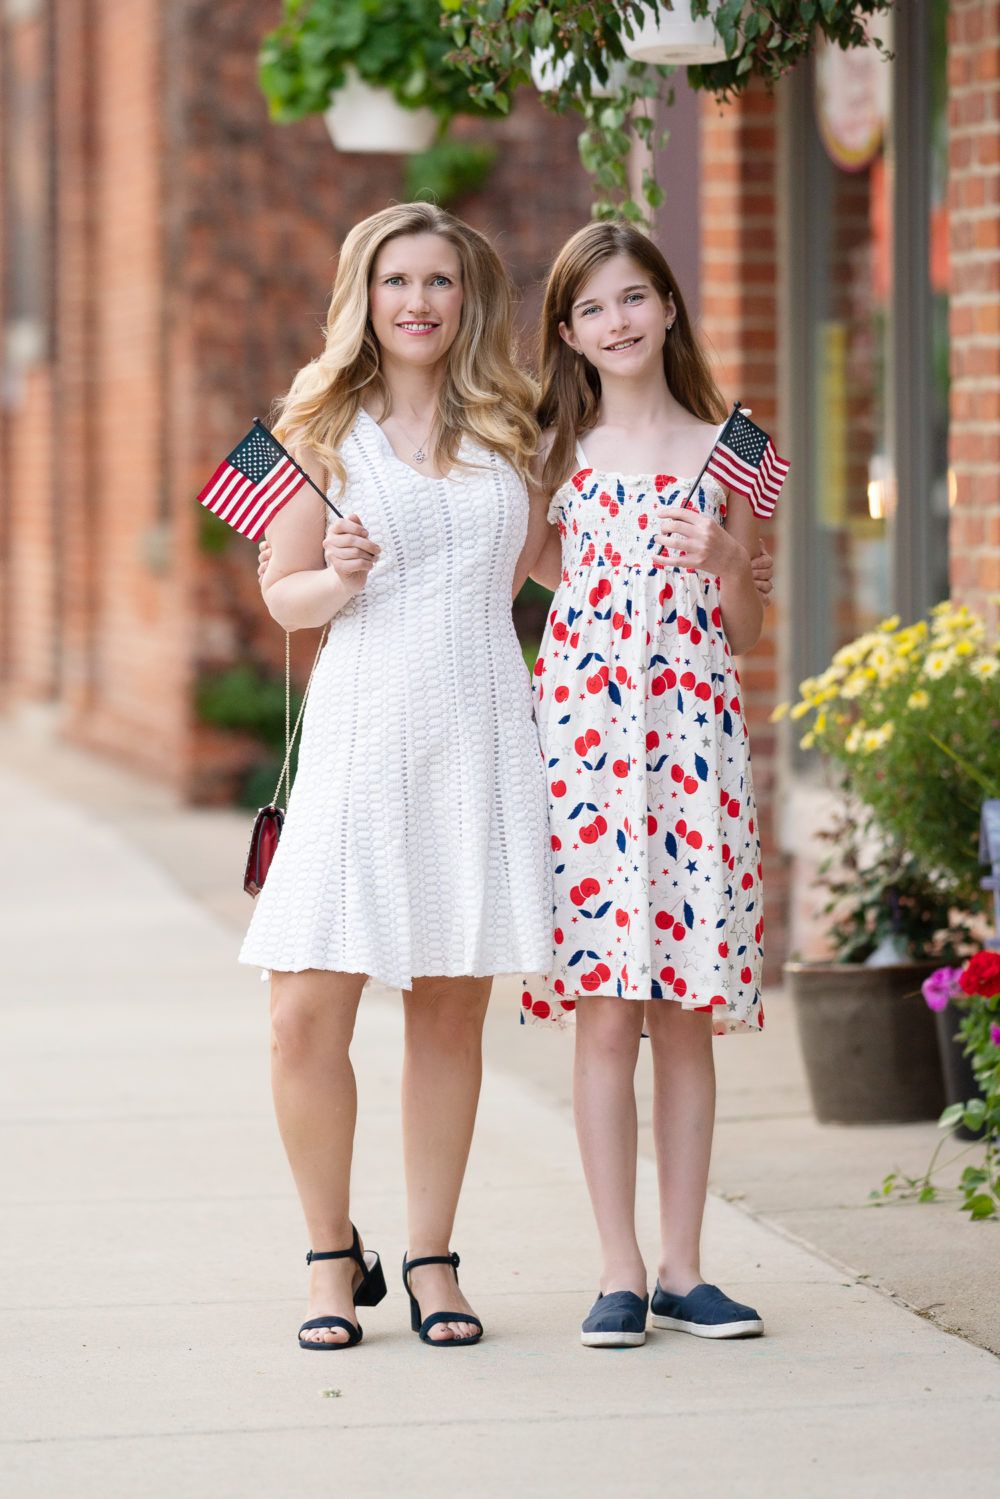 Petite Fashion Blog | Mommy and Me 4th of July Outfit Ideas | 4th of July Outfit Ideas | J. Crew Fit and Flare Dress in Geometric Lace | J. Crew Girl's Smocked Dress in Happy Cherries